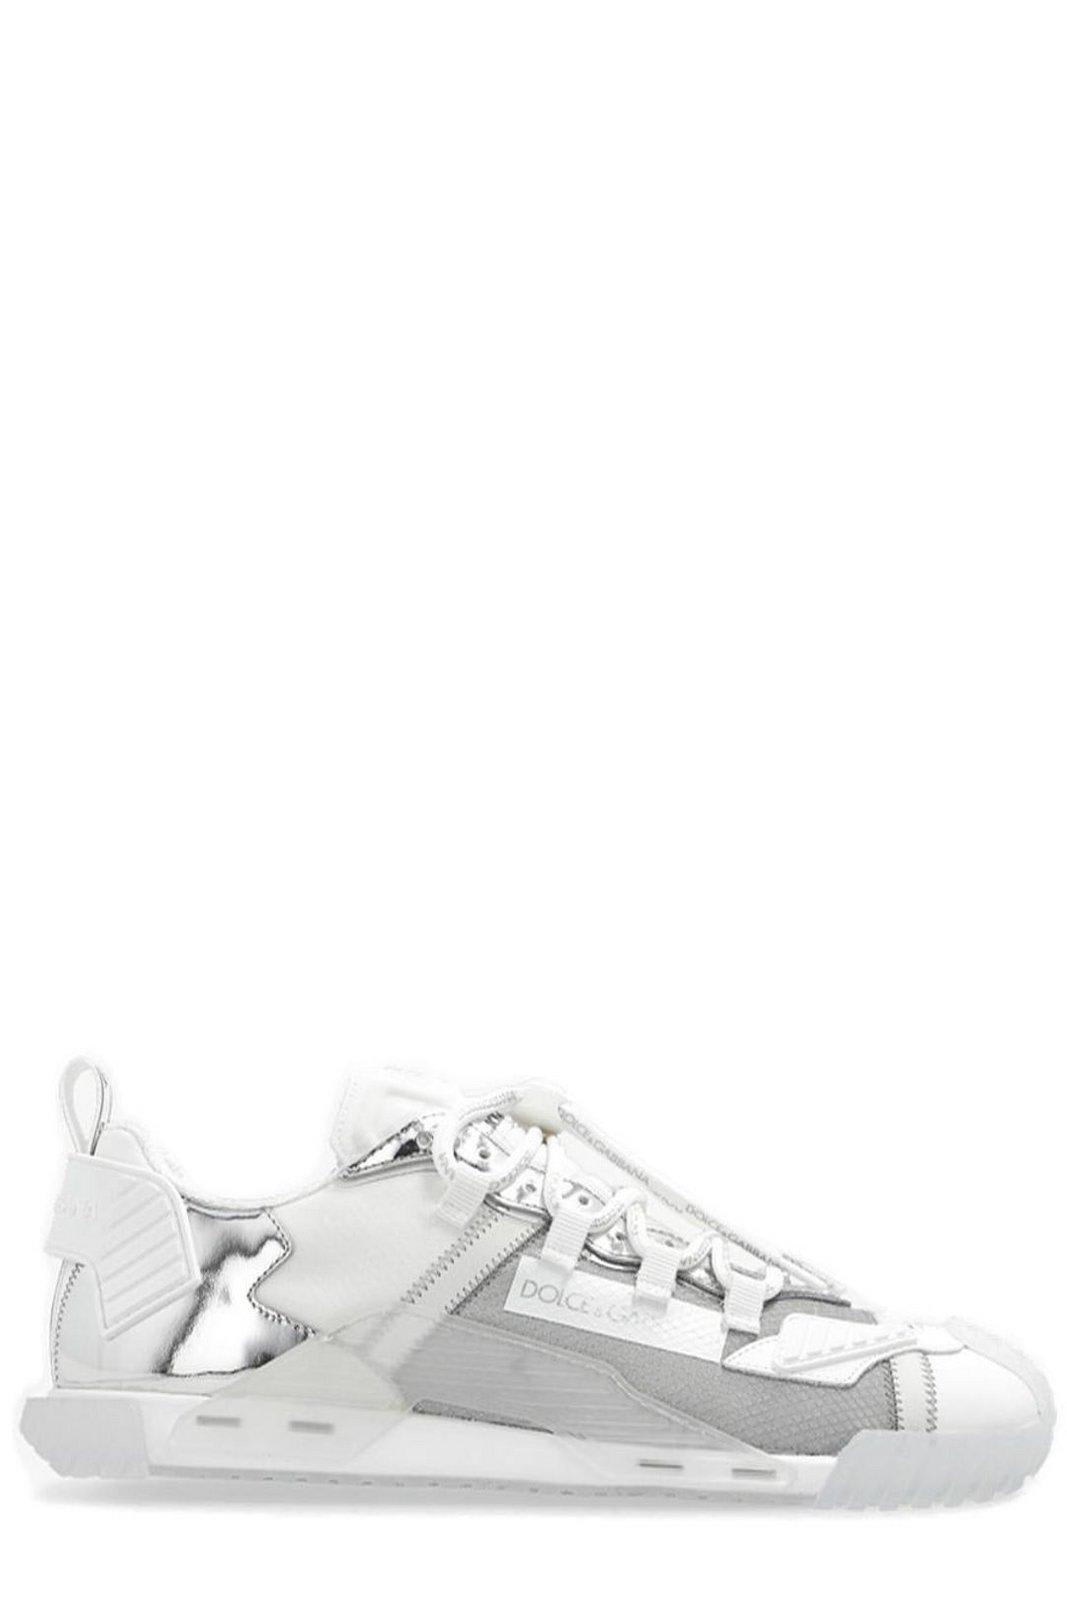 Dolce & Gabbana Ns1 Panelled Low-top Sneakers